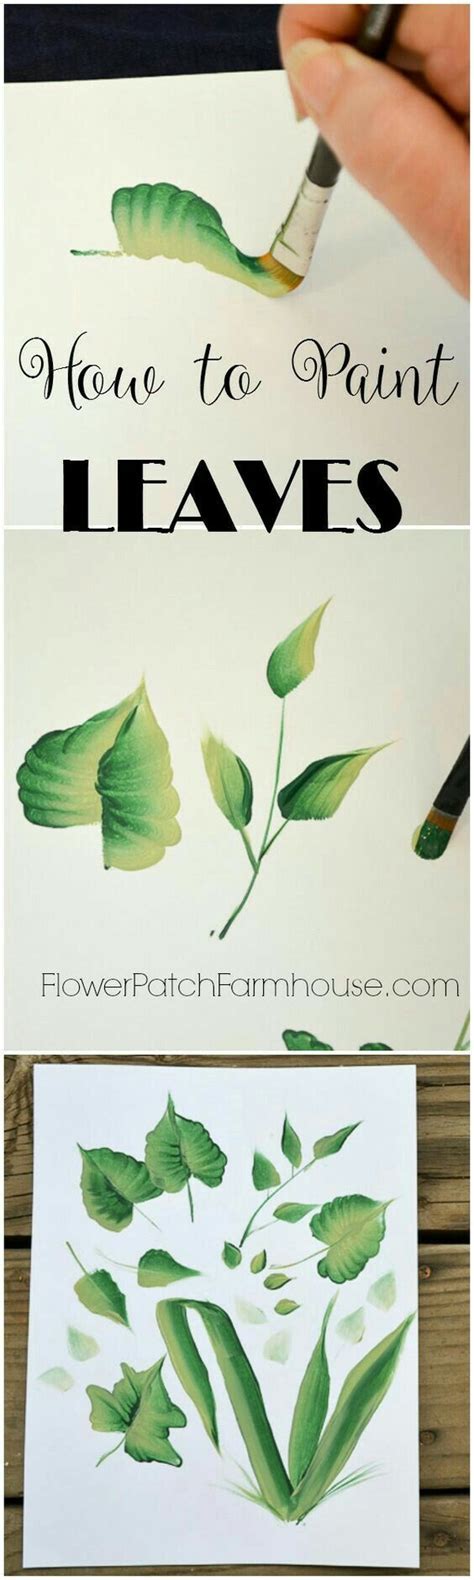 Pin by chirila maria on Drawing & painting | Flower painting, Flower ...